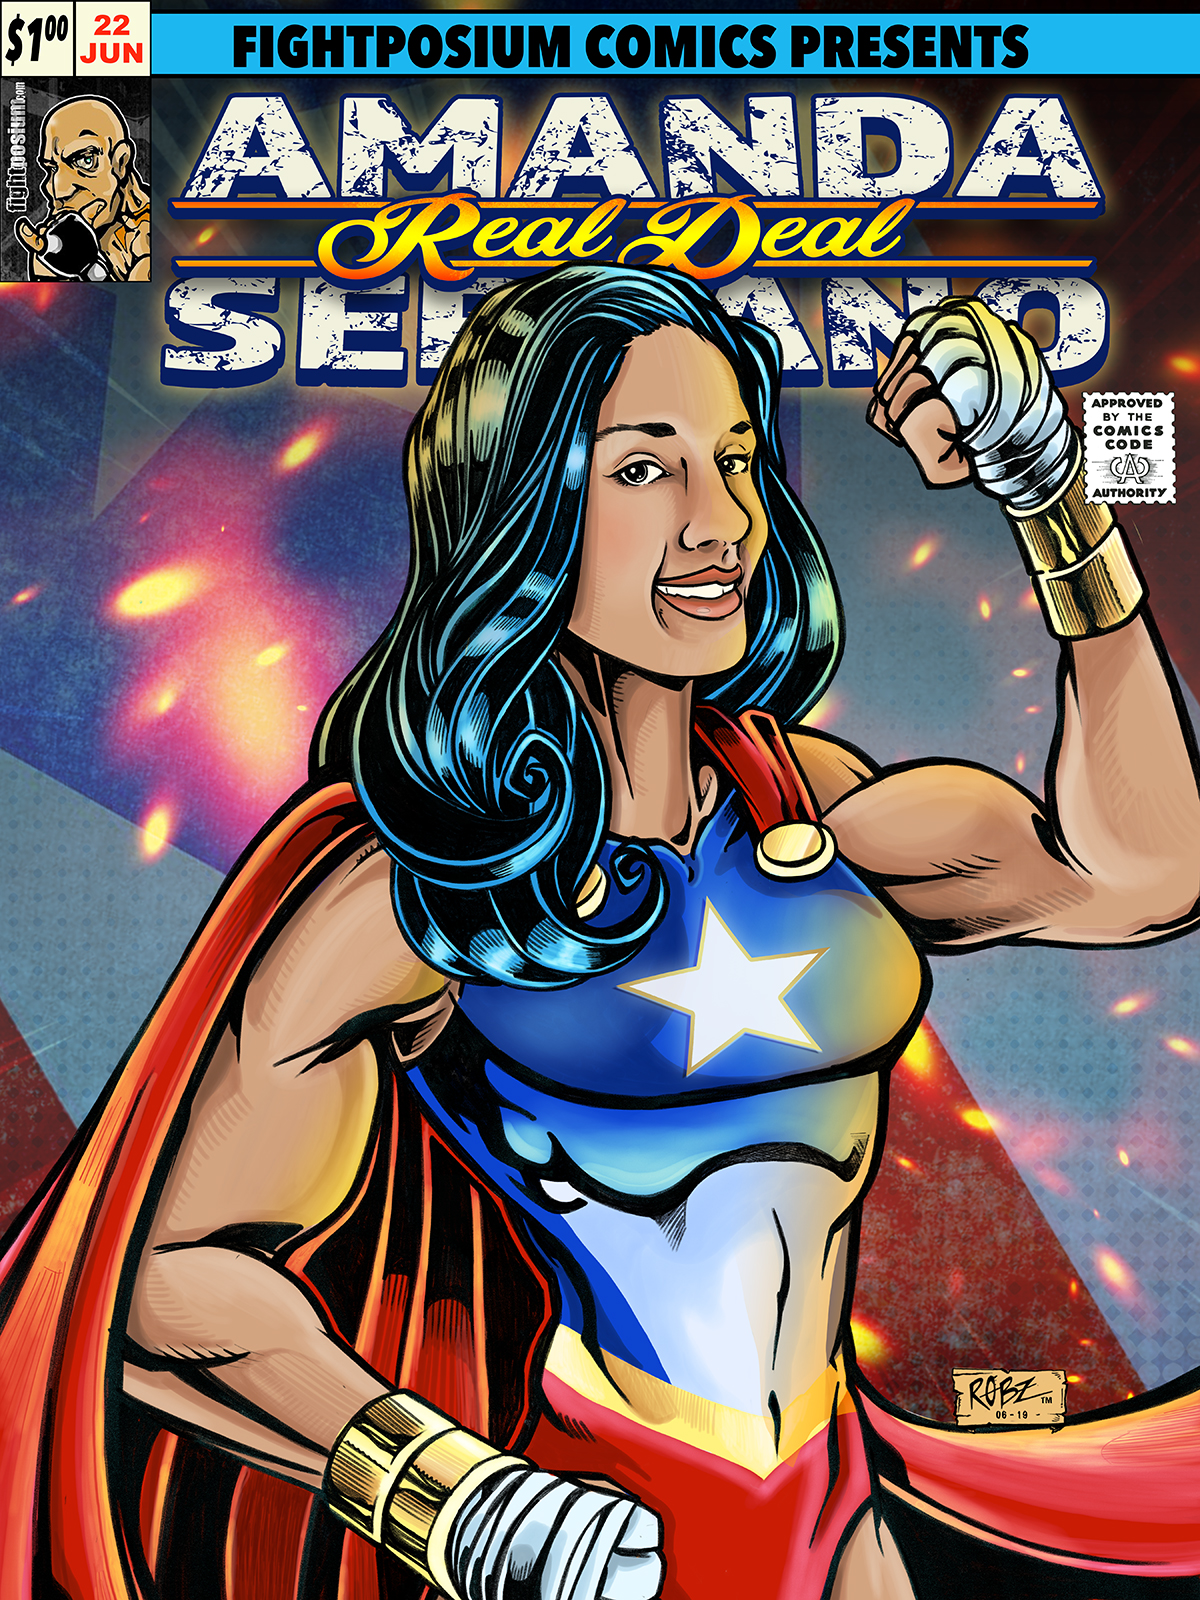 Read more about the article Amanda “The Real Deal” Serrano Superwoman